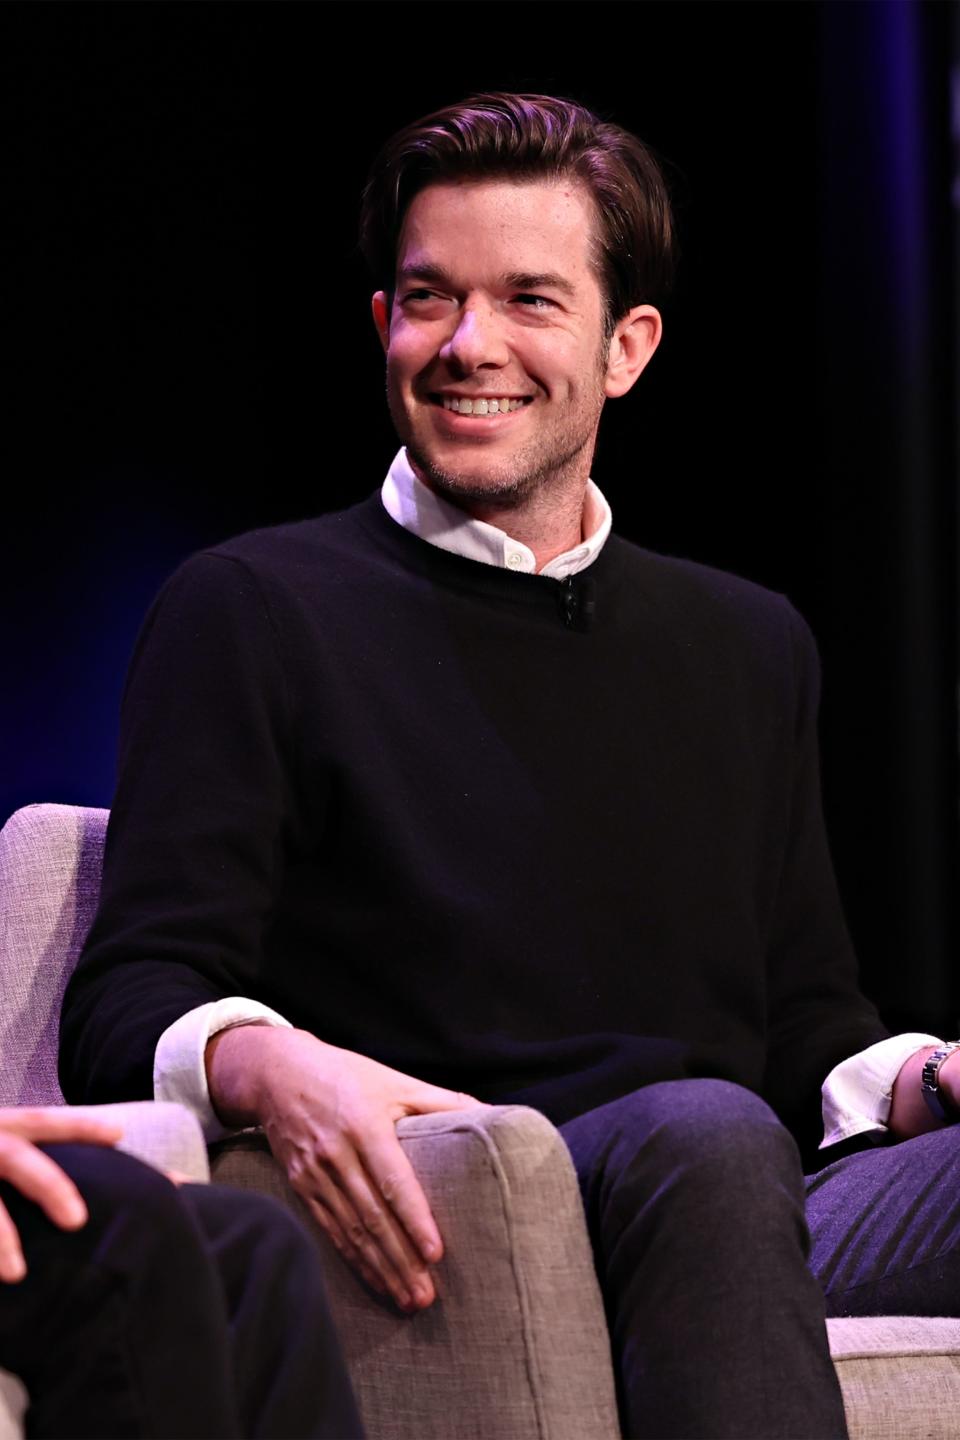 John Mulaney admits he "really identified" with Matthew Perry's addiction struggles.